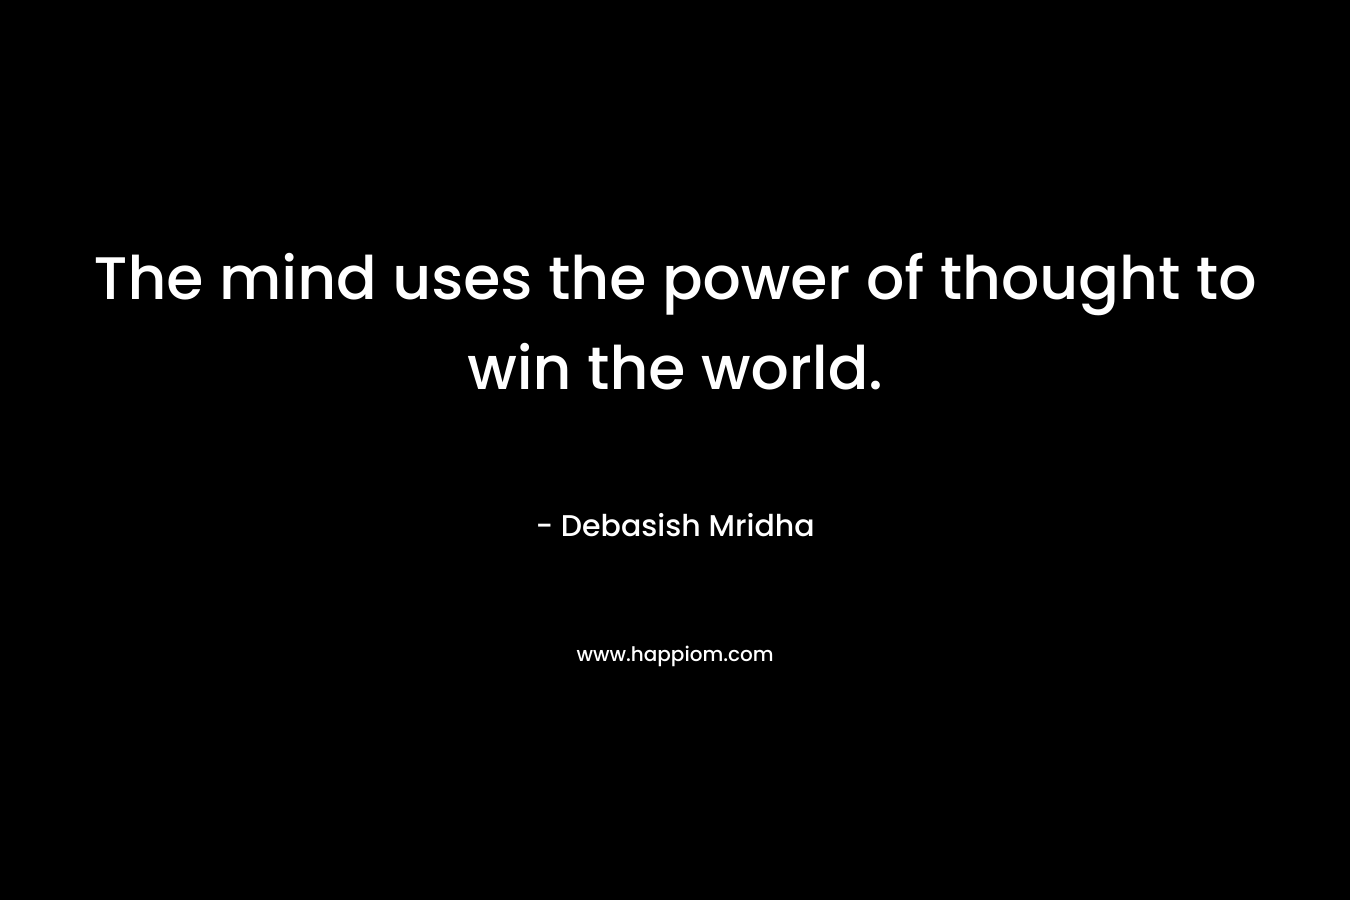 The mind uses the power of thought to win the world.